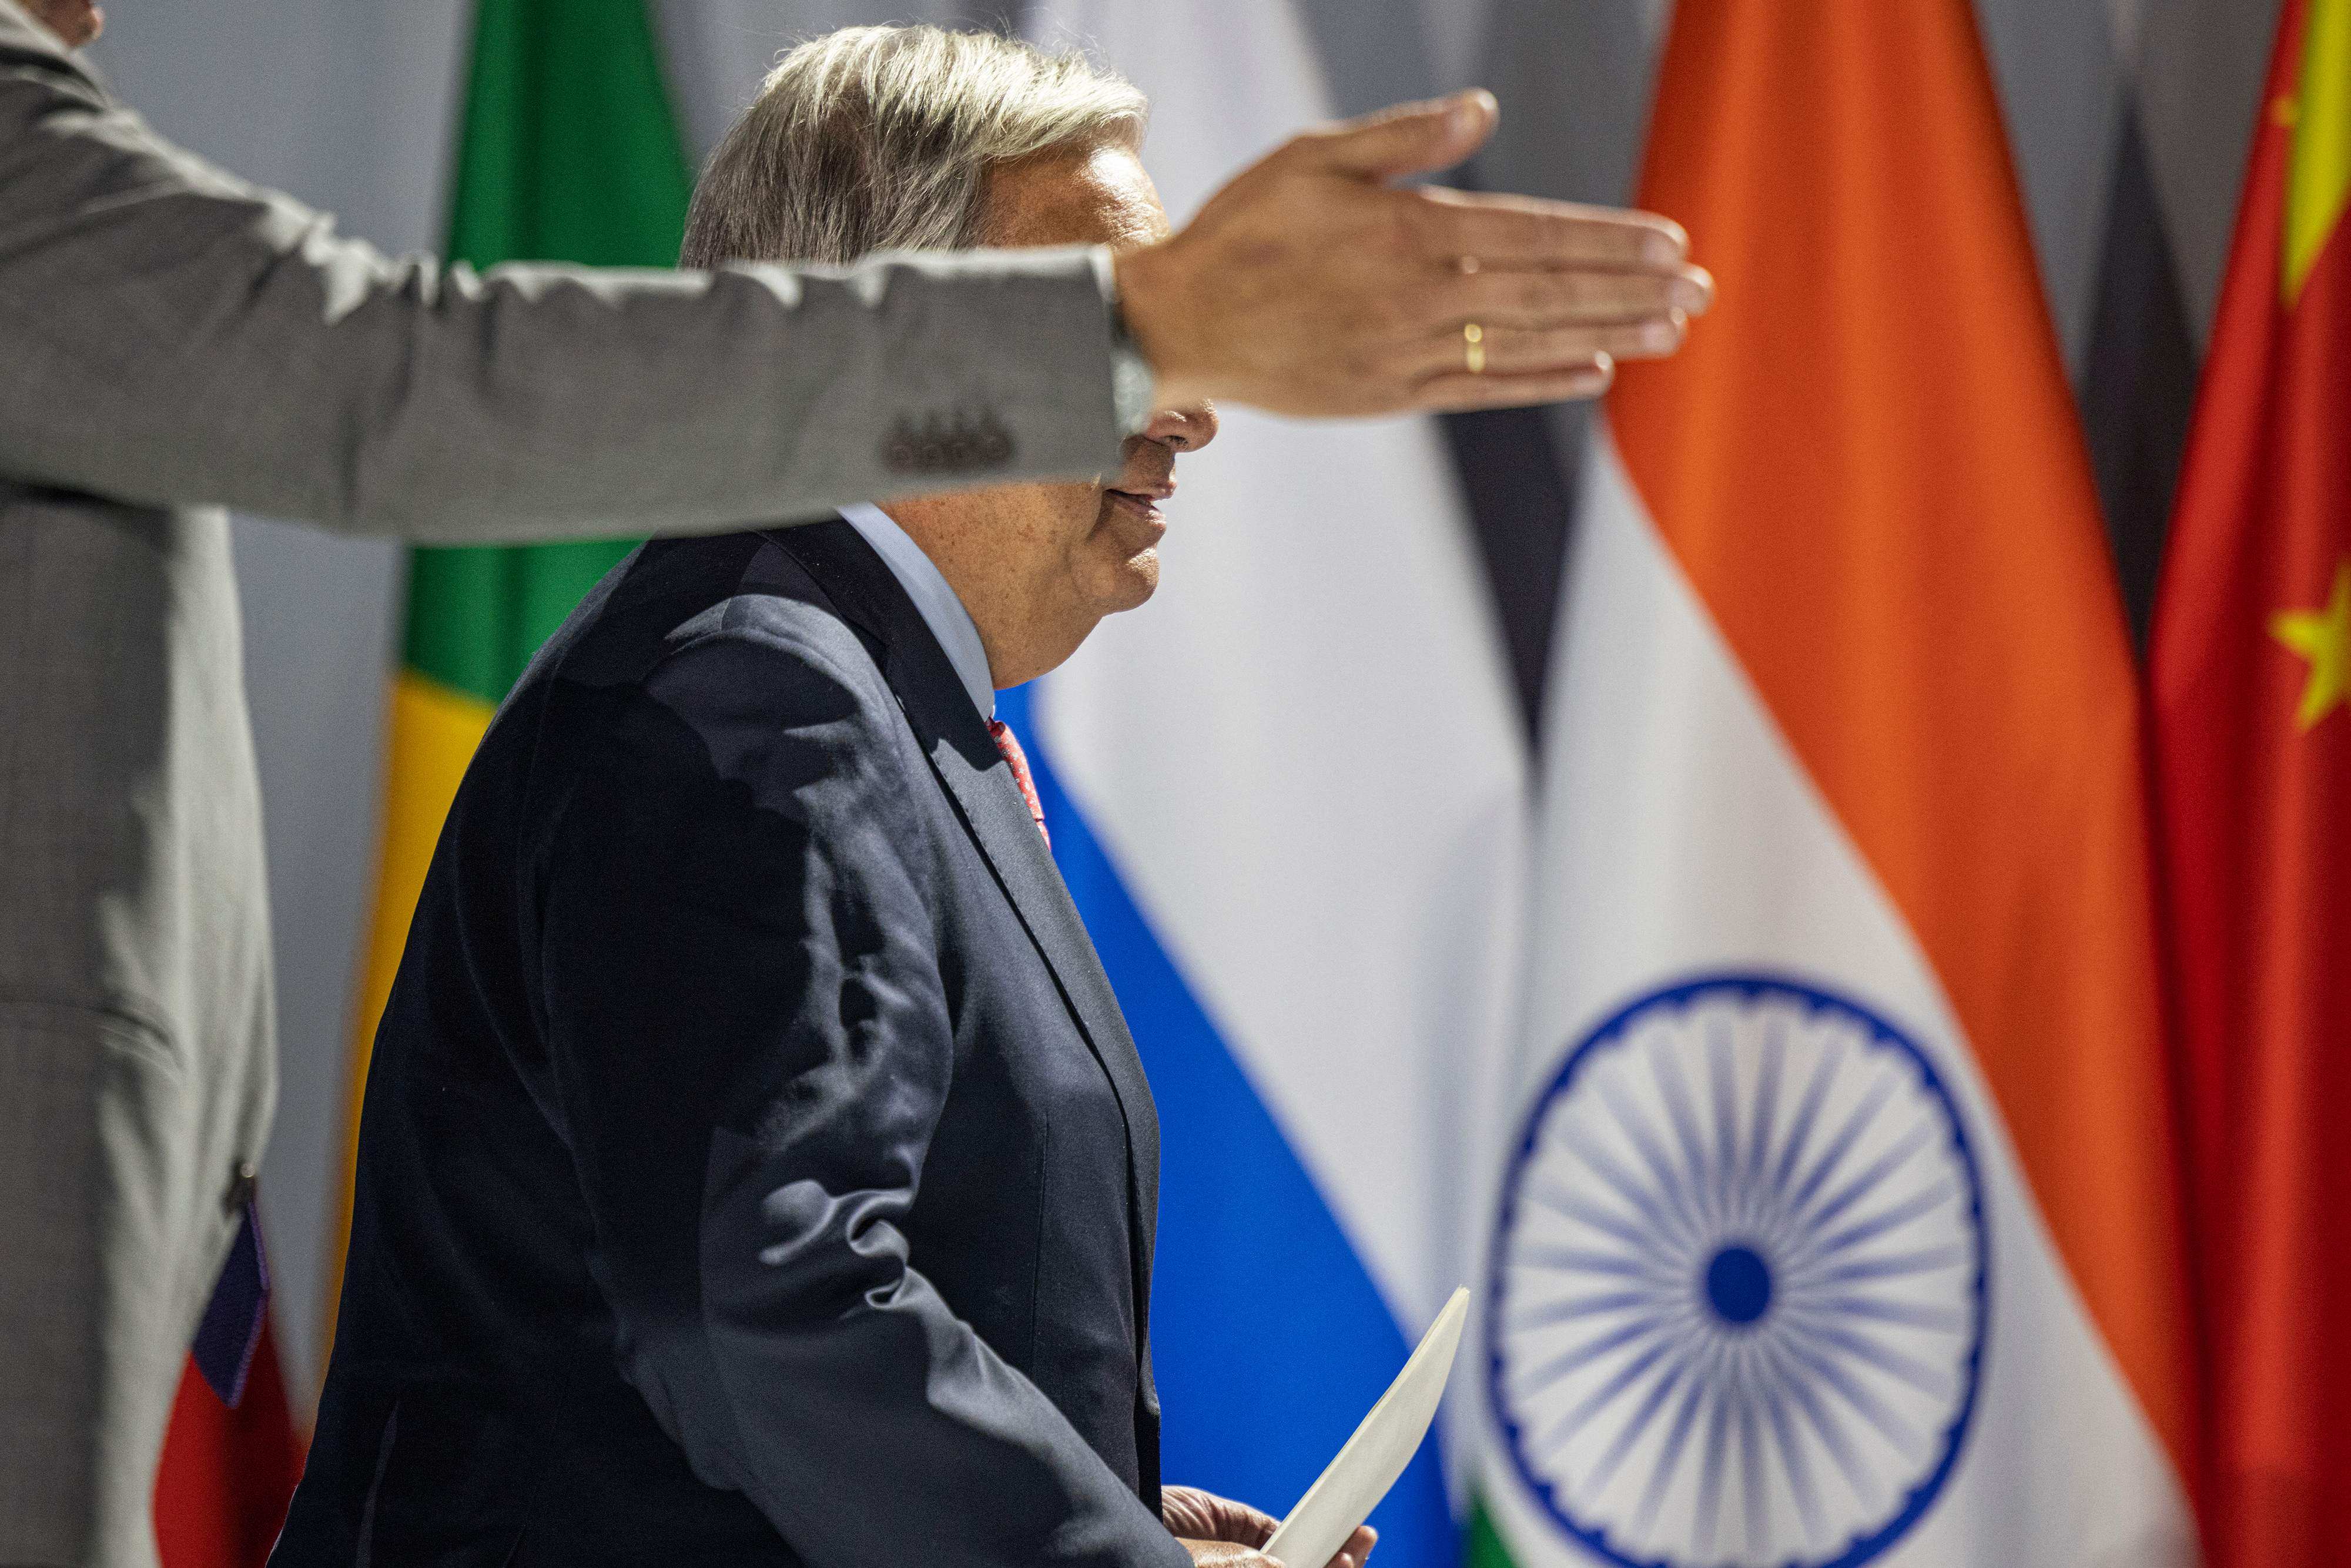 UN Secretary-General Antonio Guterres arrives at a press conference during the 2023 Brics Summit at the Sandton Convention Centre in Johannesburg on August 24. The Brics grouping’s expansion could be seen as part of an effort to promote institutions not crafted and led by Western powers. Photo: AFP